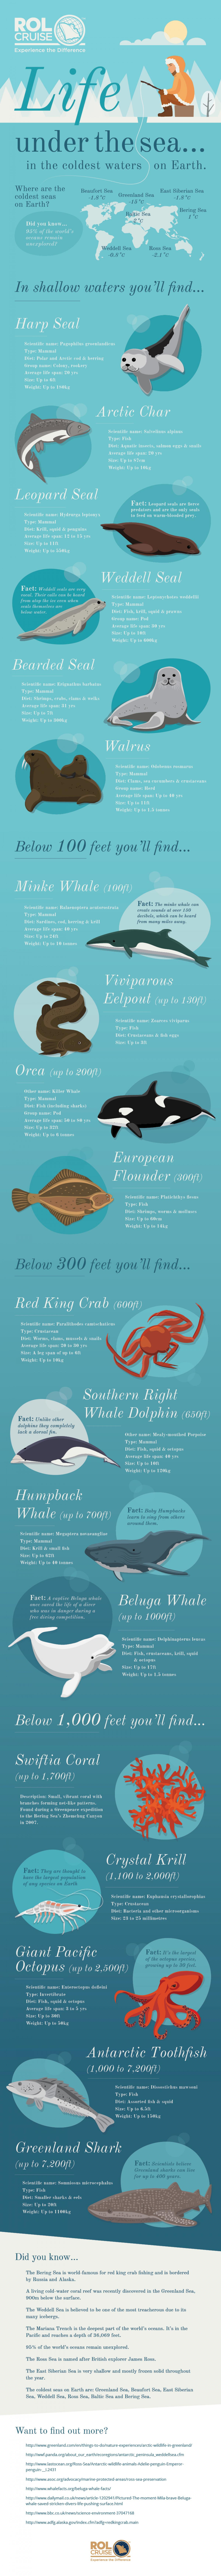 under the sea infographic